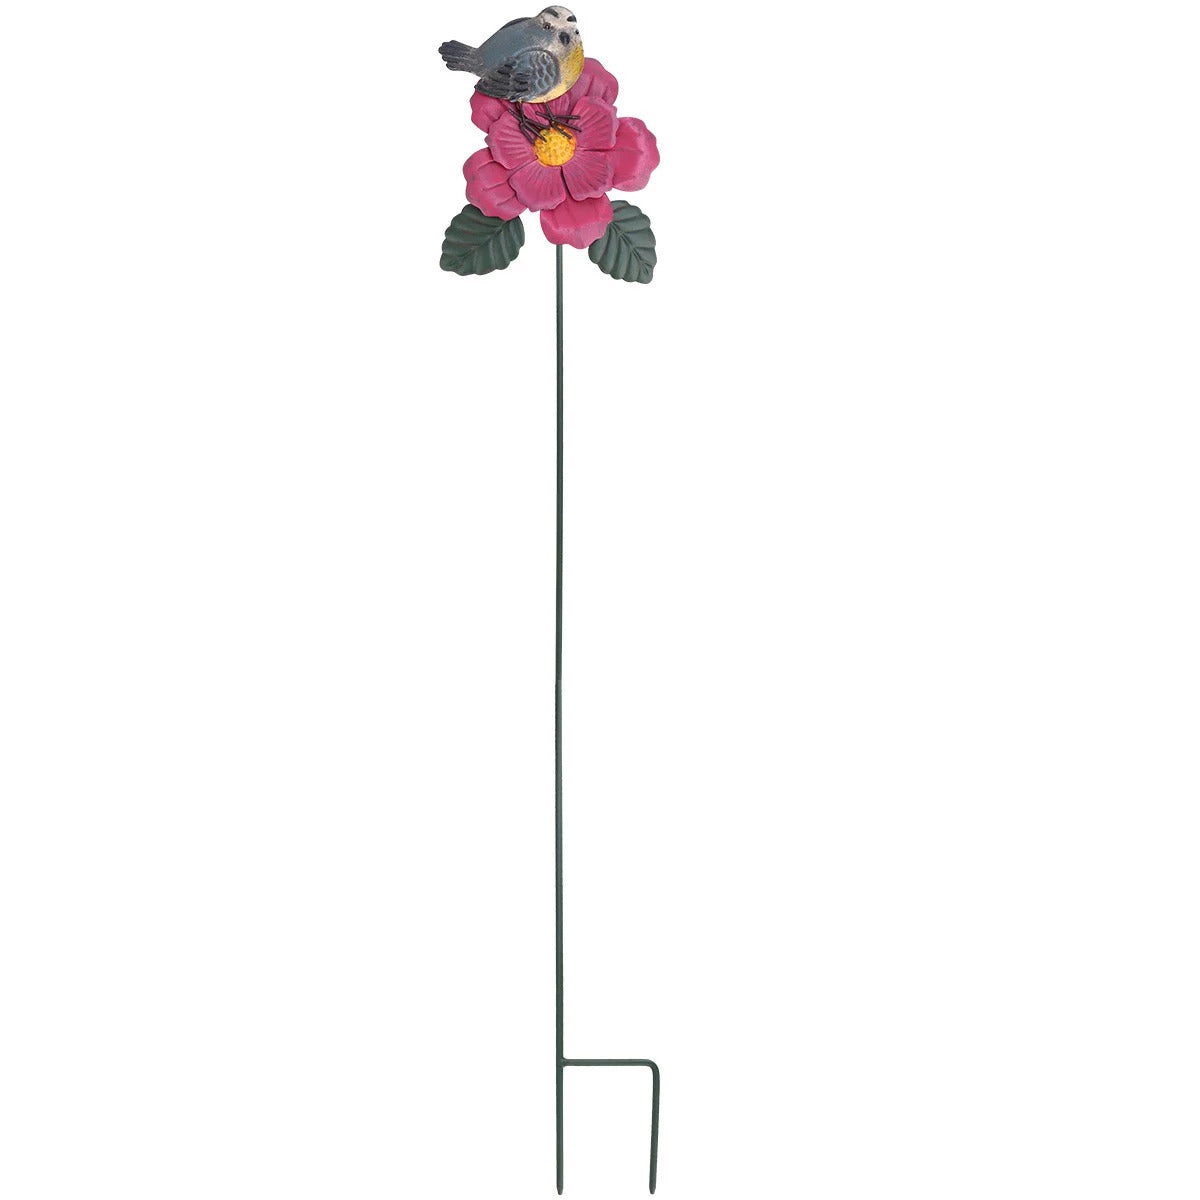 Metal Flower Stakes and Garden Stakes on the Pink Flower with Goldfinch Bird for Garden Ornaments